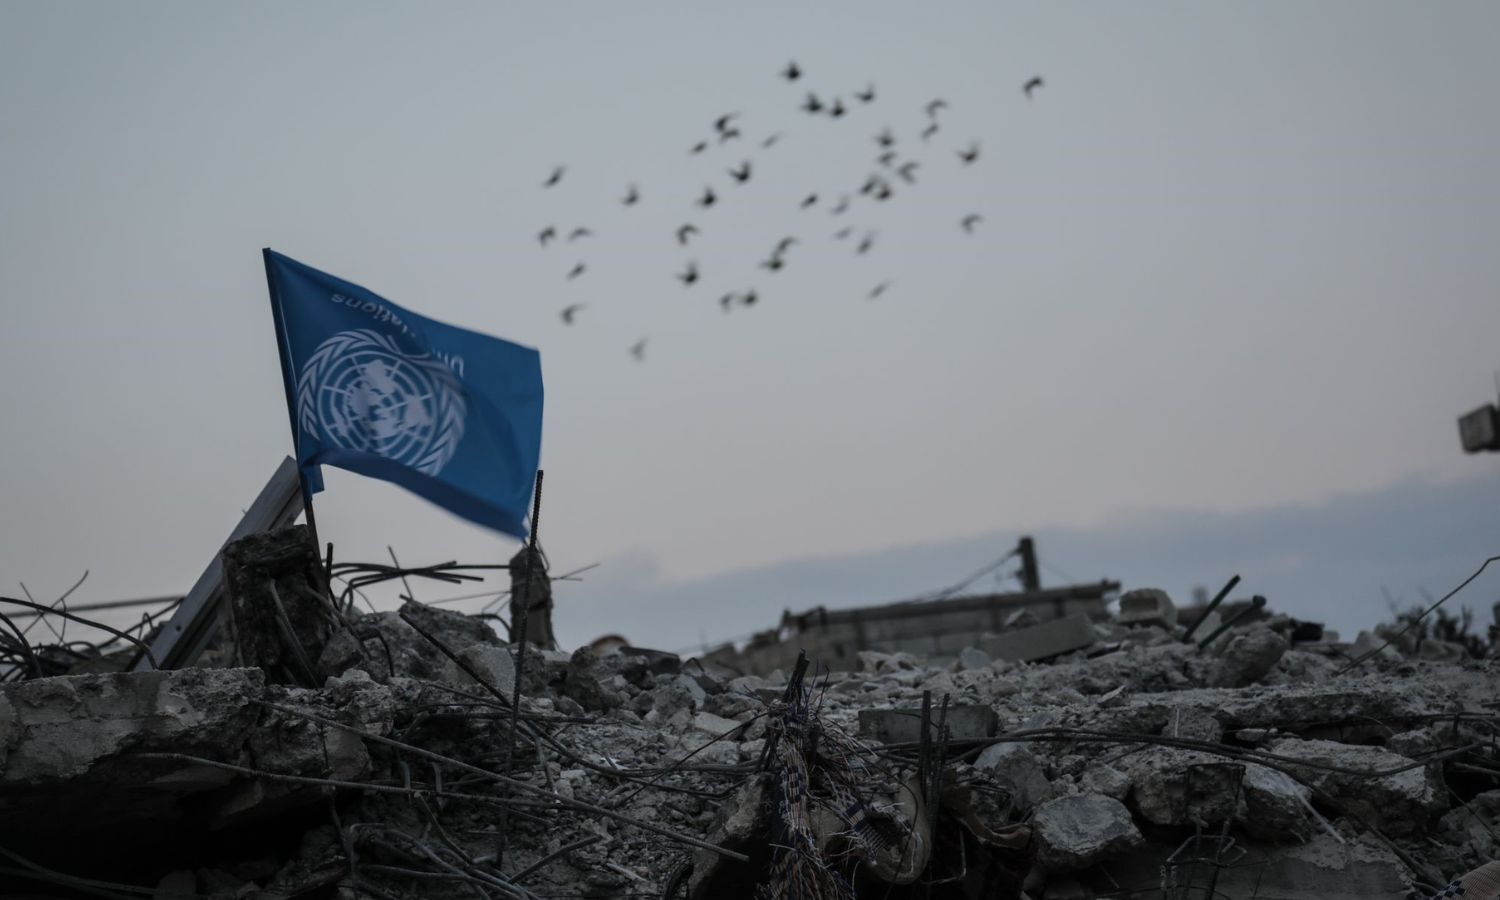 The UN’s flag is upside down over the rubble of a destroyed building in the town of Jindires in the northern countryside of Aleppo, denouncing the delay in response following the earthquake that struck Turkey and four regions of Syria - February 11, 2023 (Facebook/Malik Abu Obeida)